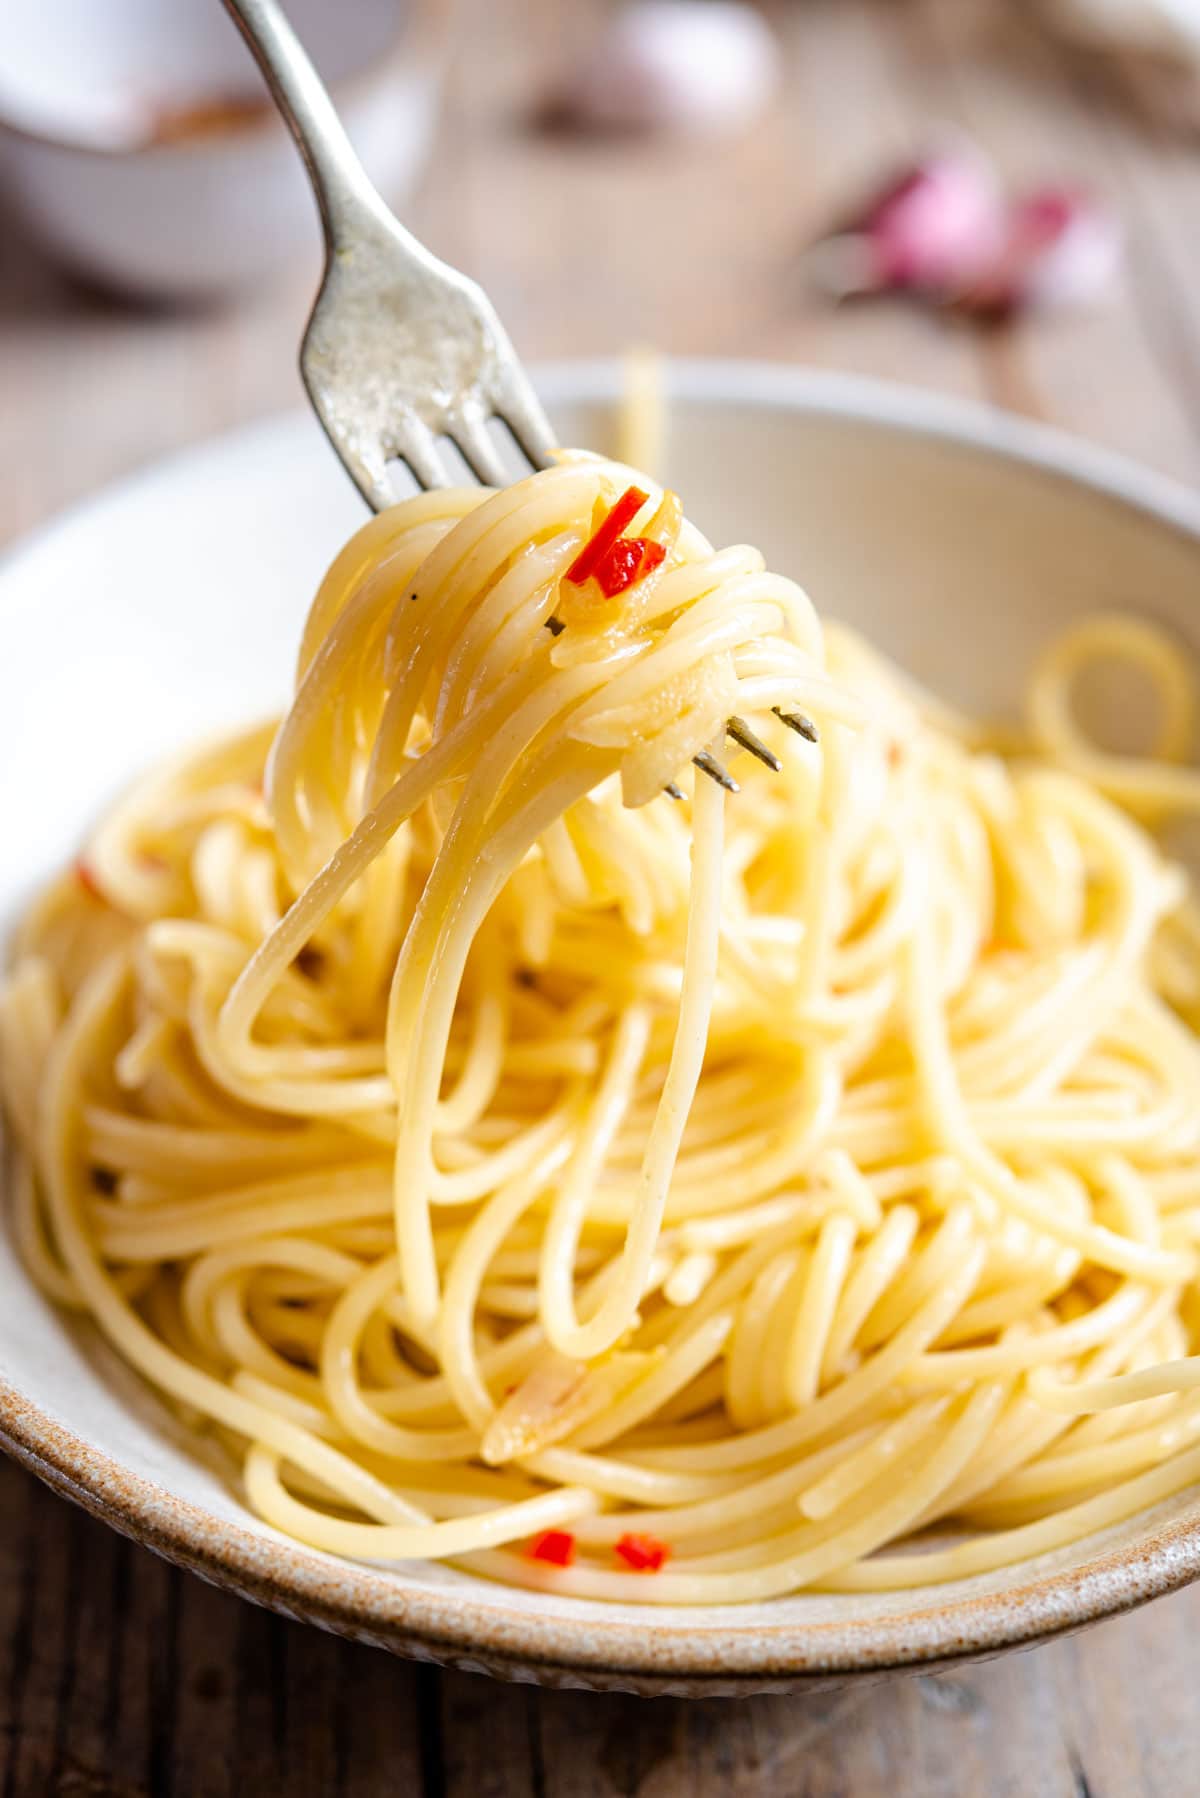 A close up of spaghetti on a fork with chlli and garlic